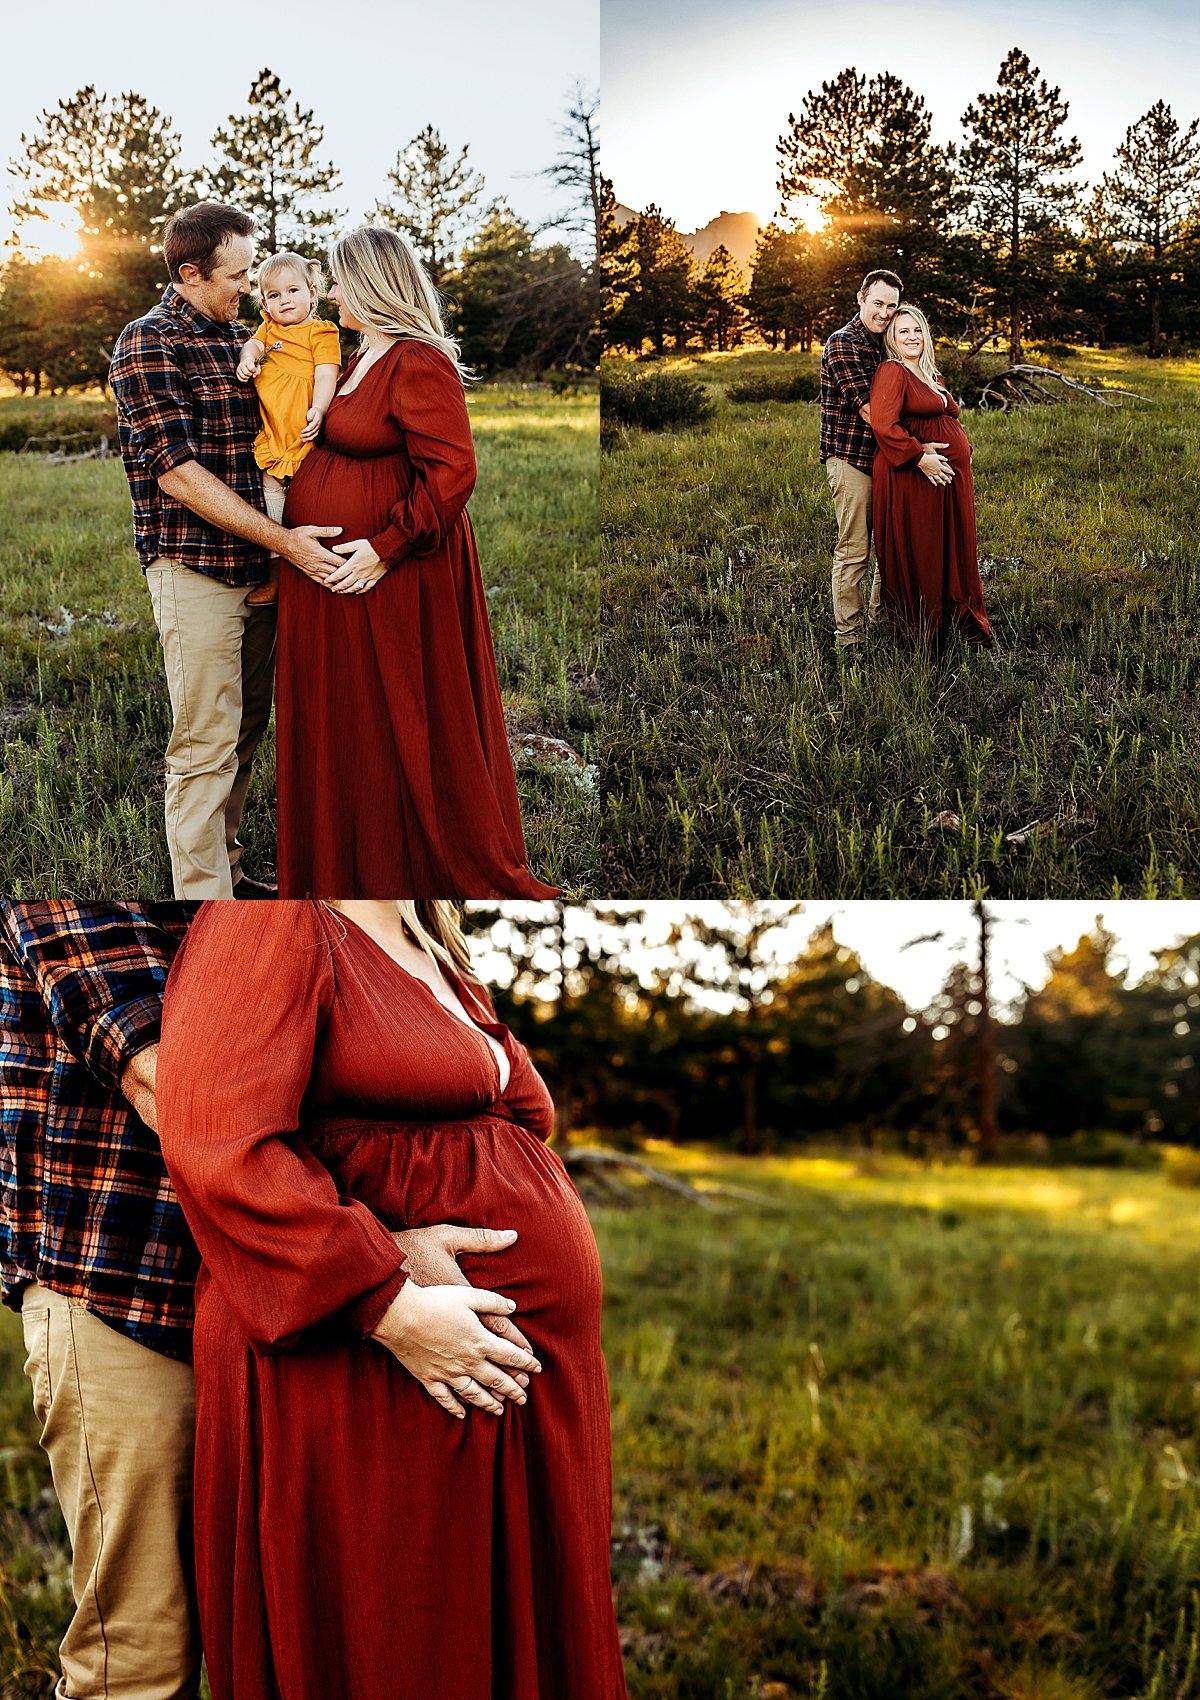  Husband puts hand on mom's maternity dress infield by Boulder Colorado photographer 